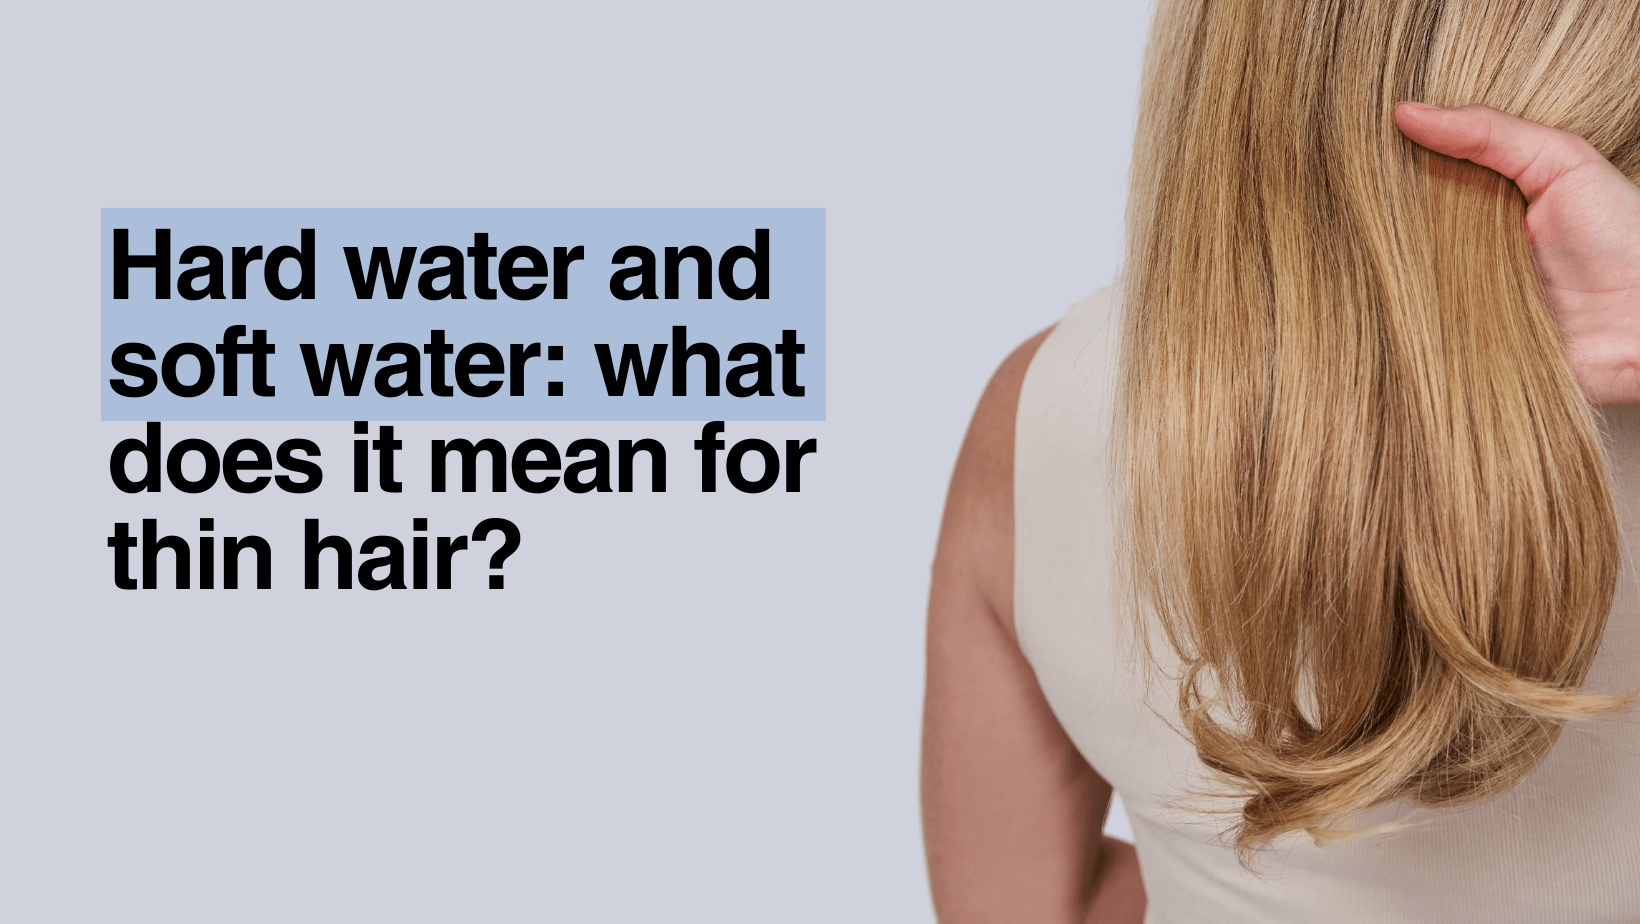 Hard water and soft water: what does it mean for thin hair?